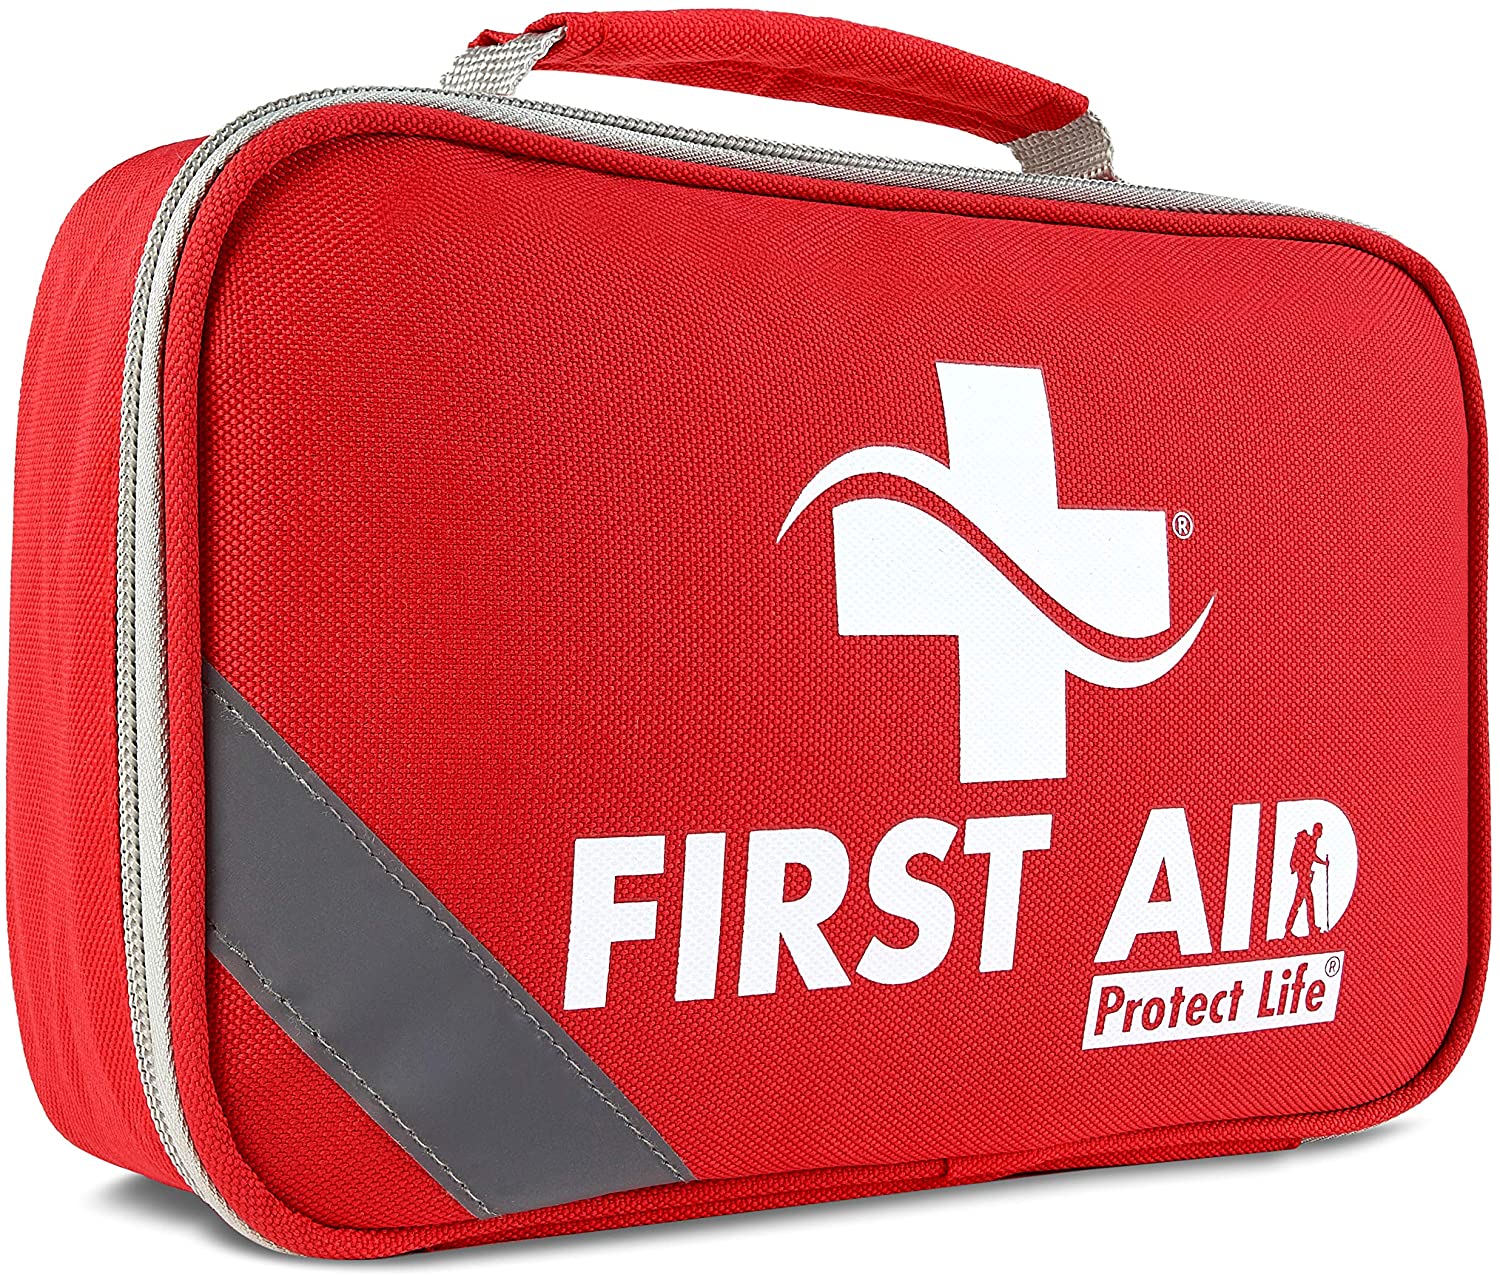 Detail First Aid Kits Pictures Nomer 13